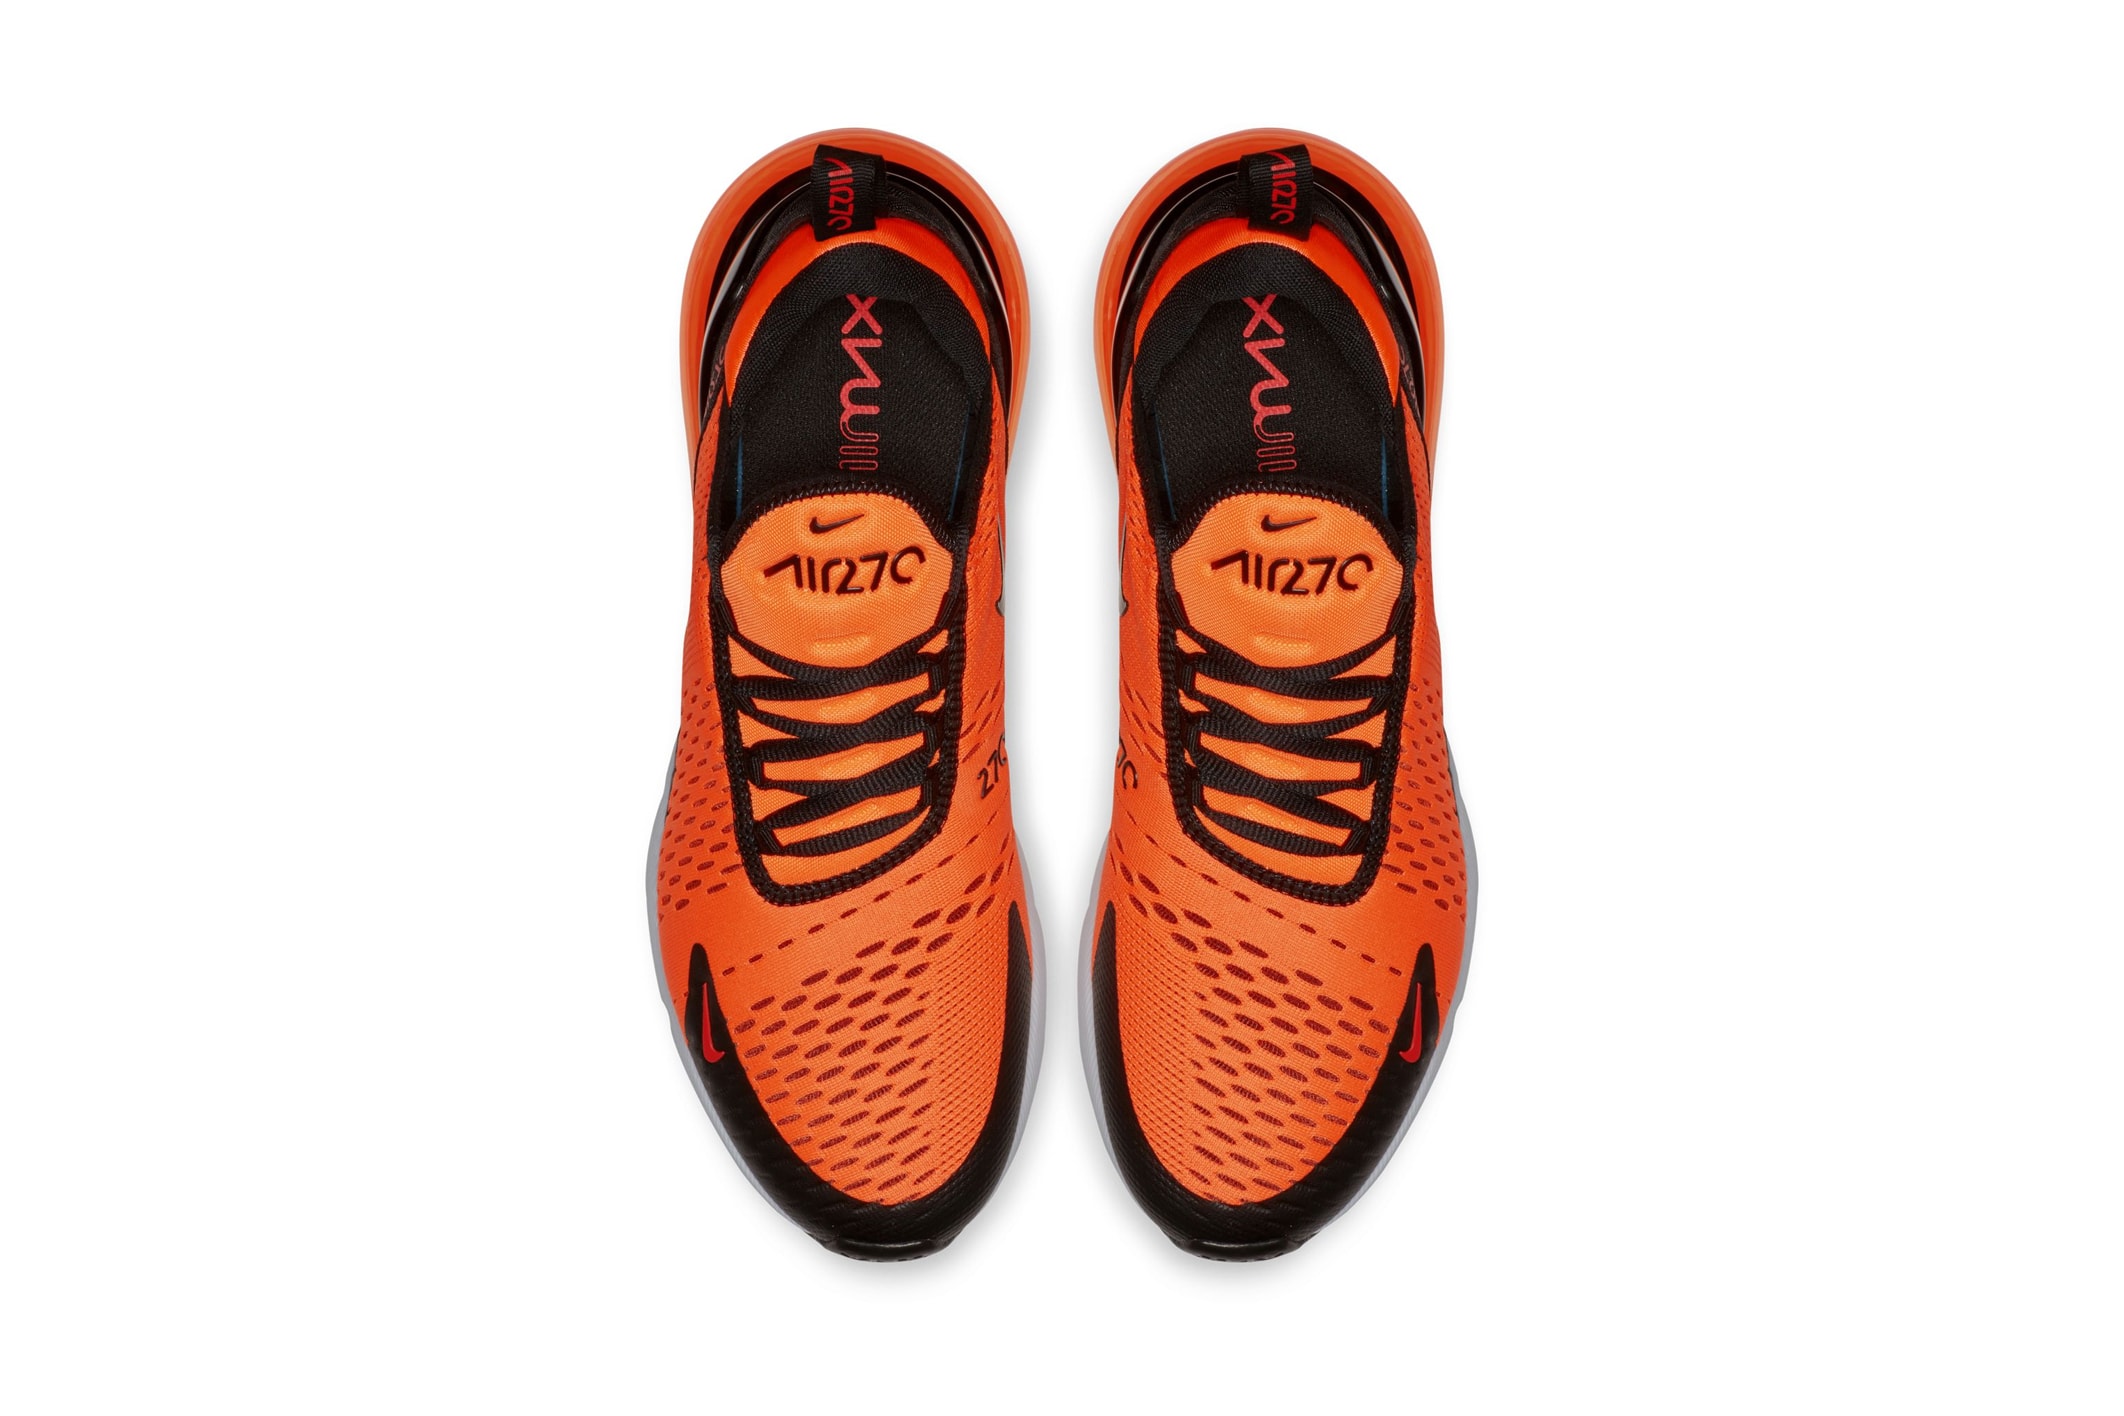 Nike Air Max 270 Total Orange first look release date sneaker colorway TOTAL ORANGE BLACK WHITE CHILE RED